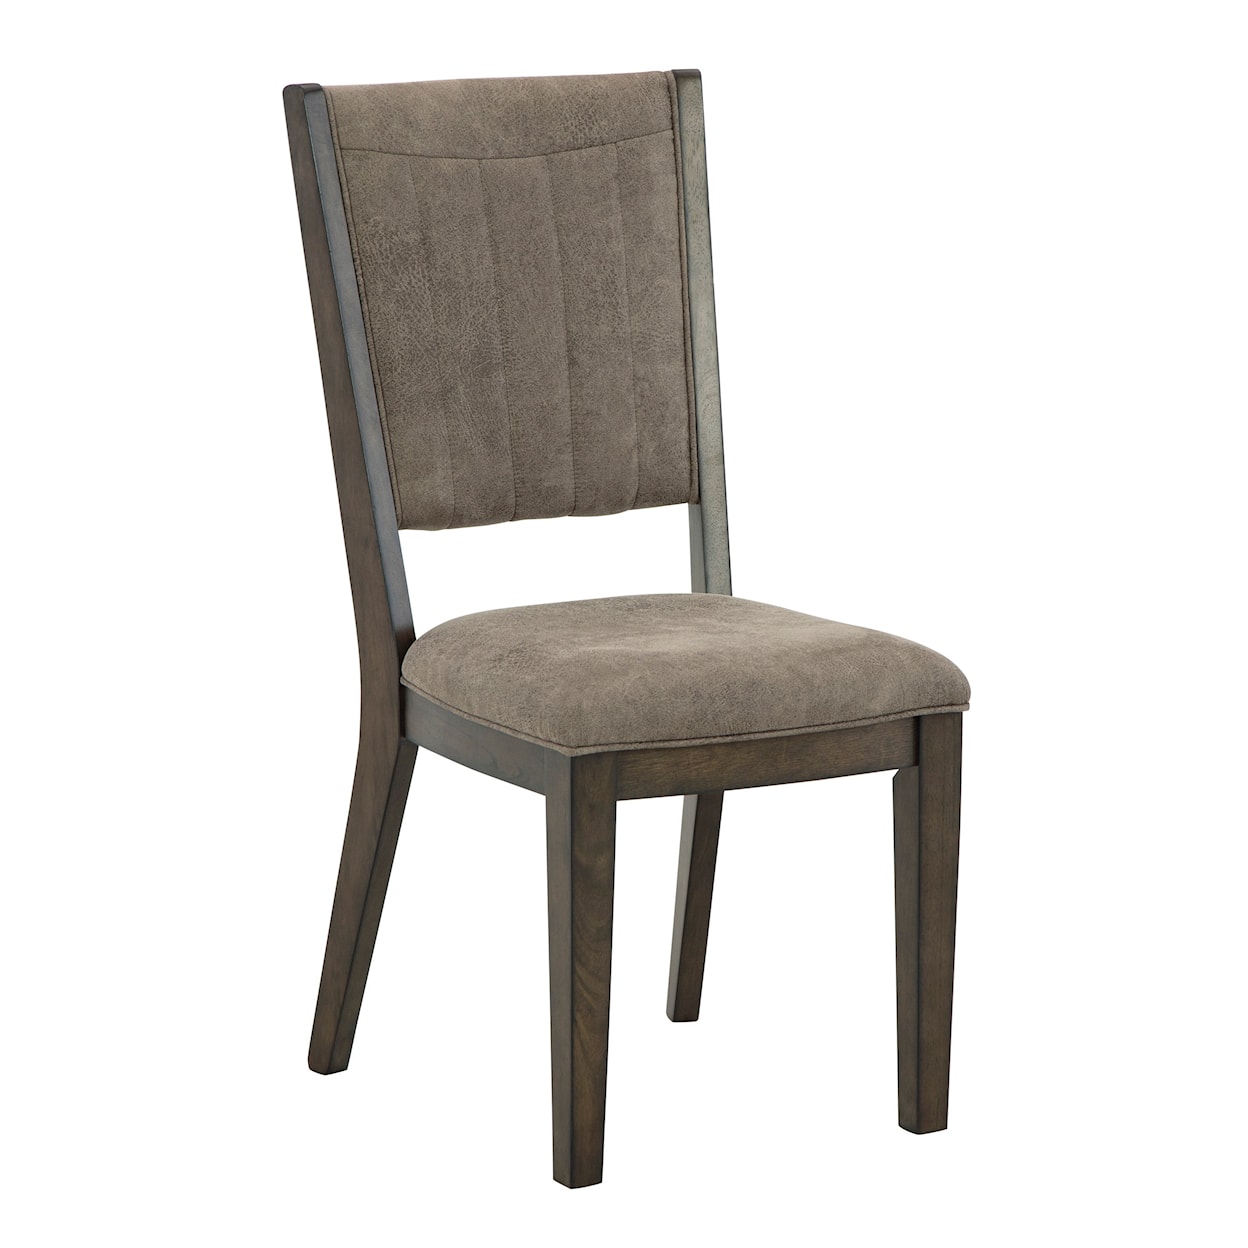 Signature Design by Ashley Wittland Dining Chair